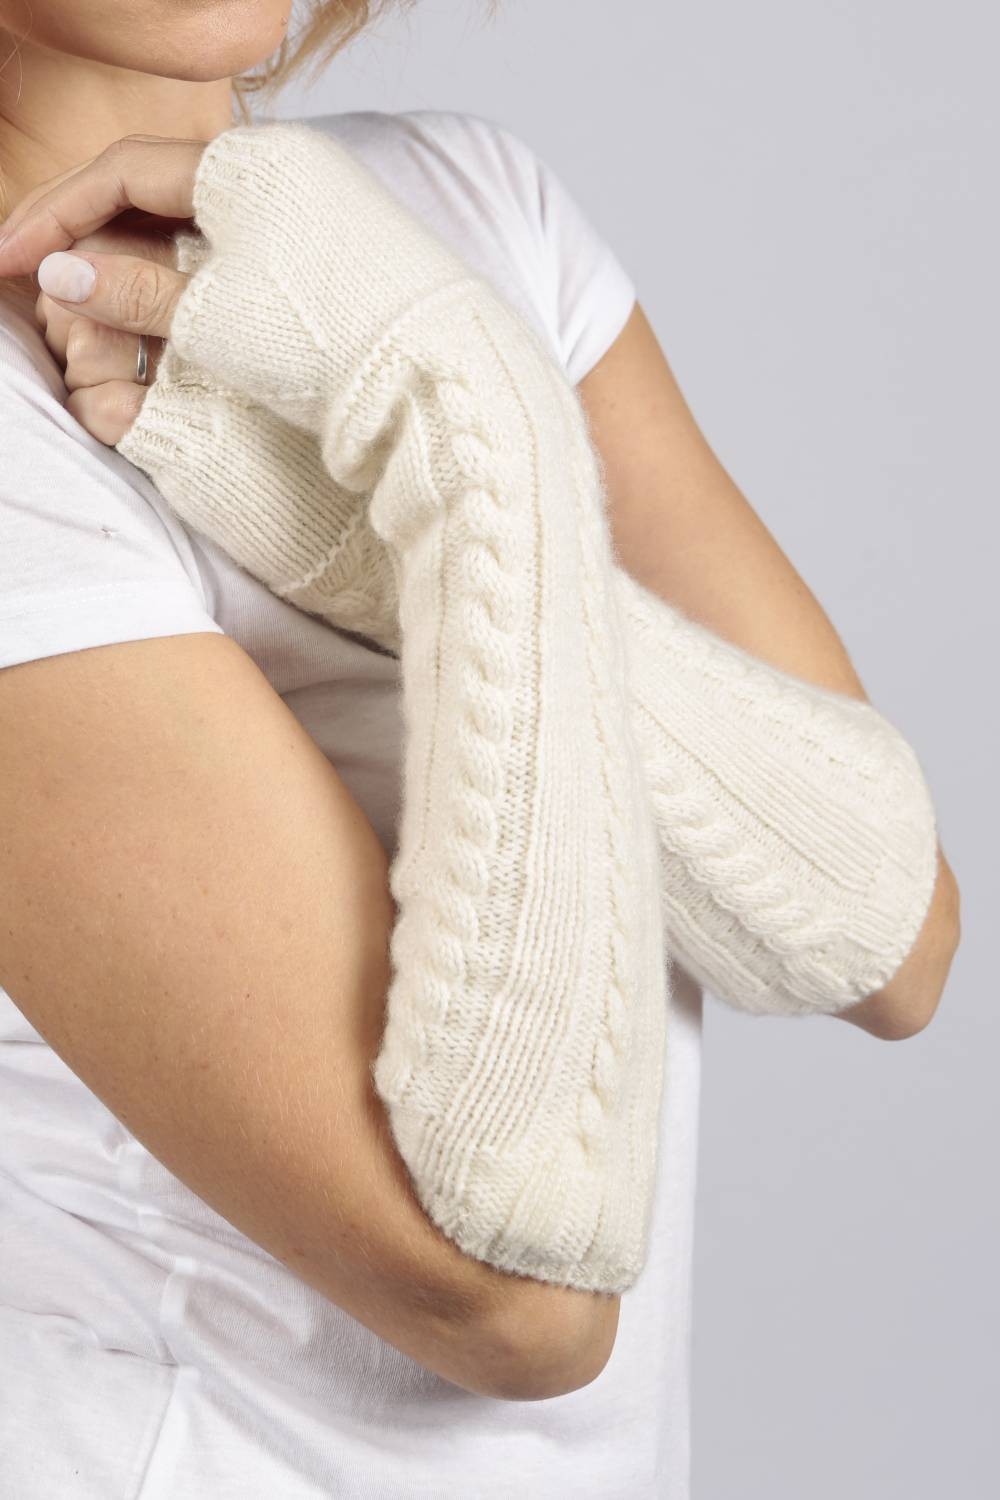 PURE CASHMERE ArmWarmers Fingerless Gloves Handmade Eco Friendly Arm warmers Accessories Gloves & Mittens Arm Warmers 